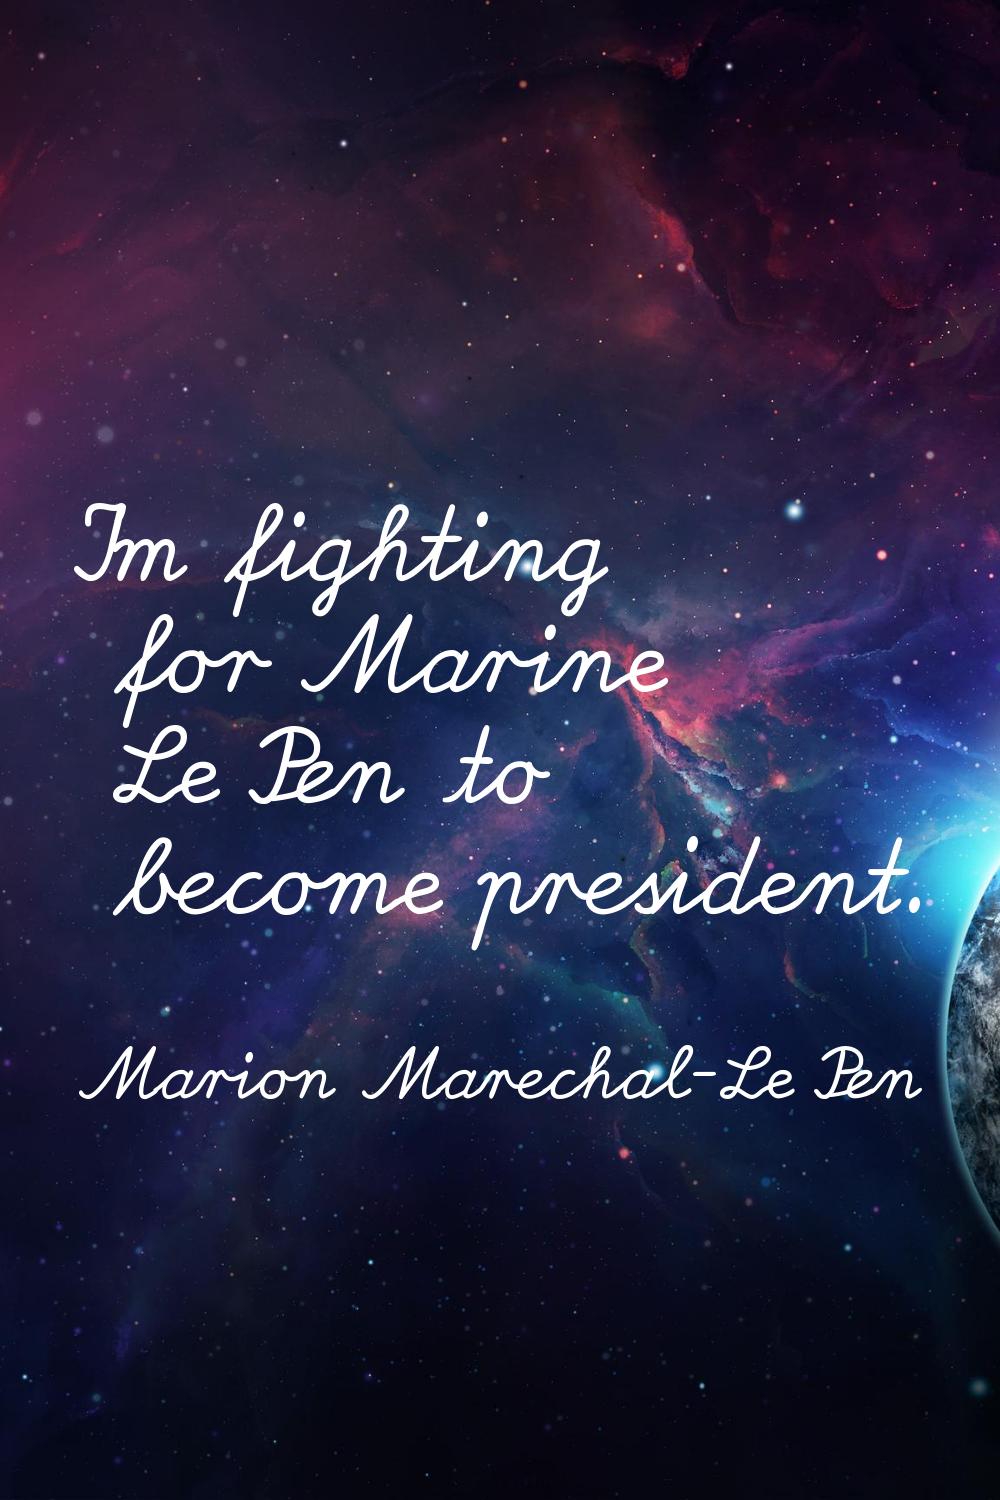 I'm fighting for Marine Le Pen to become president.